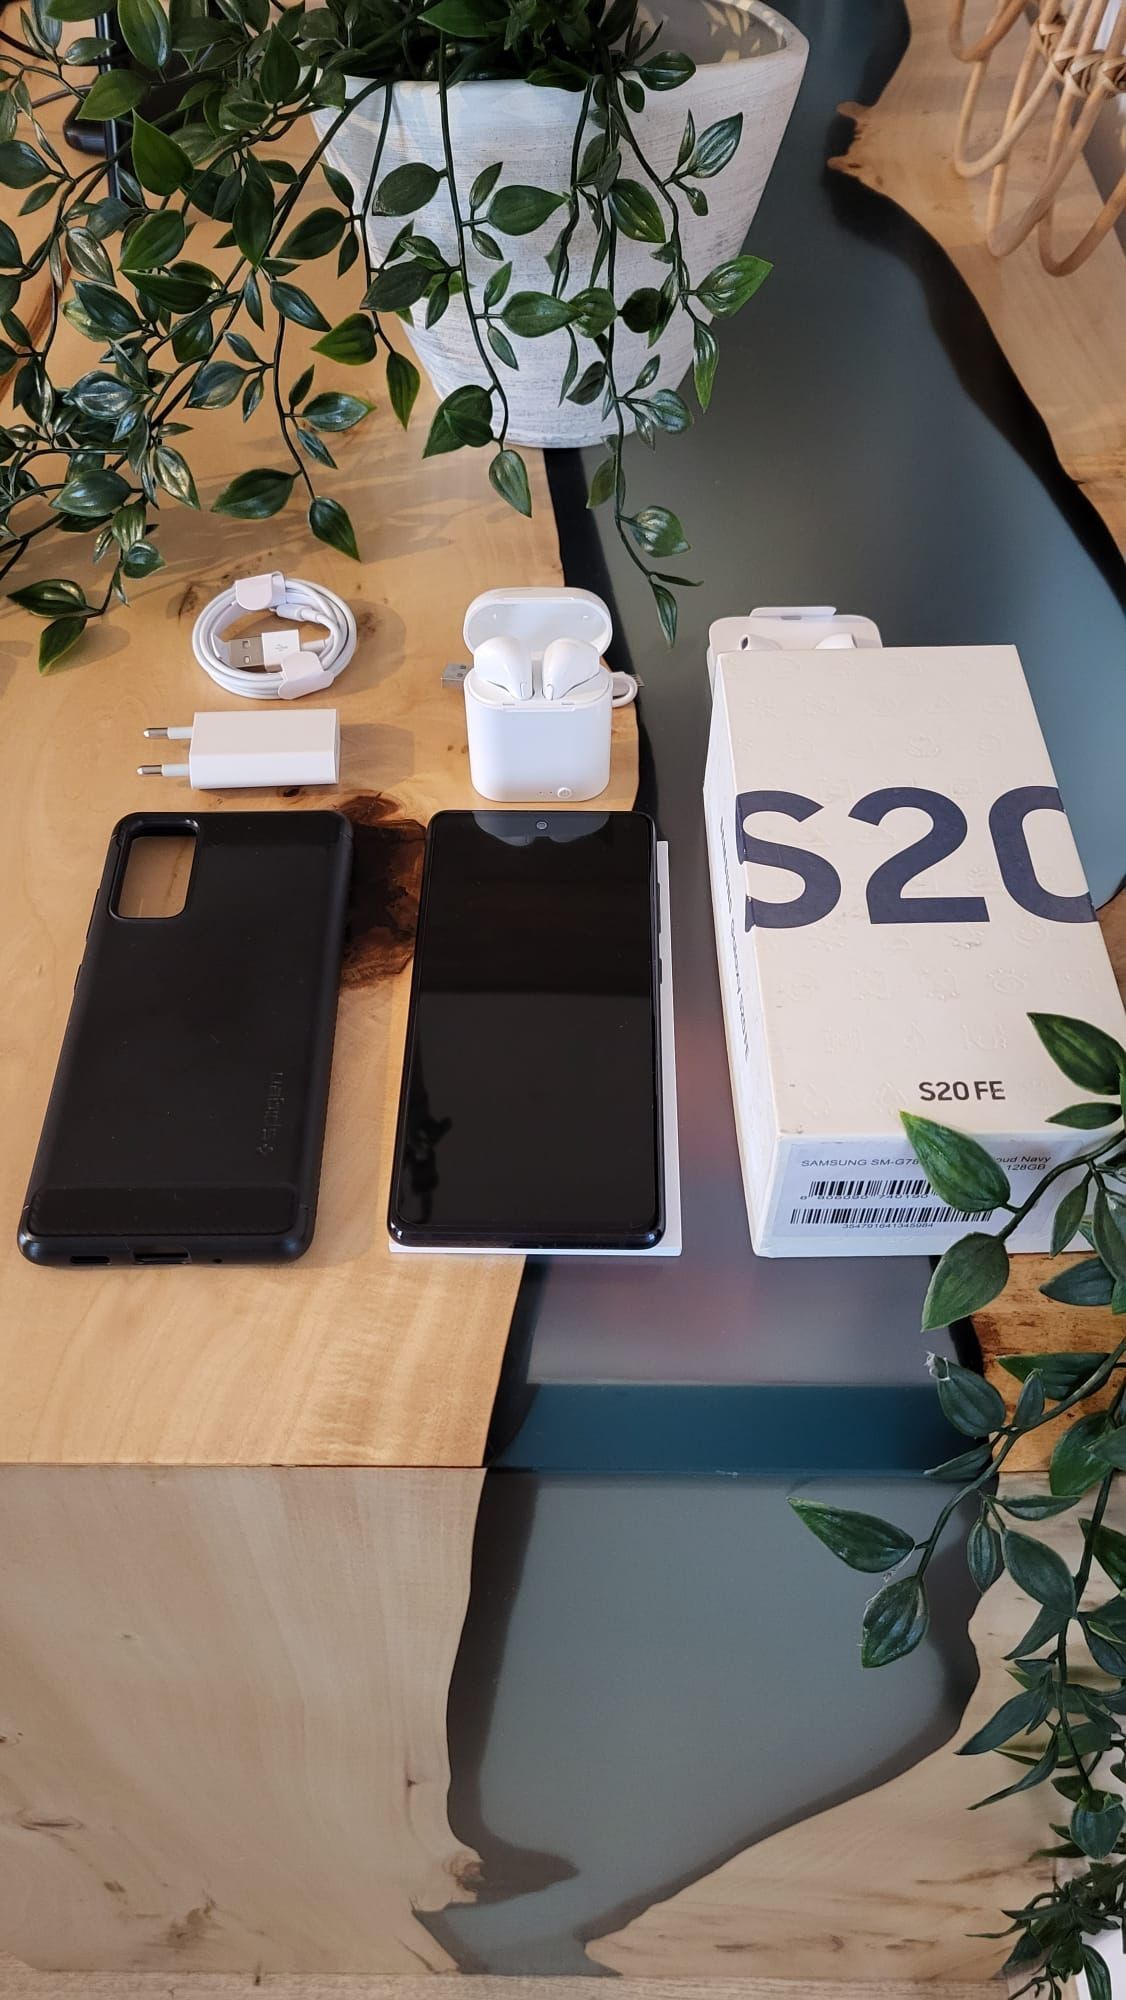 Samsung Galaxy S20 FE, 128GB, impecabil, airpods + accesorii